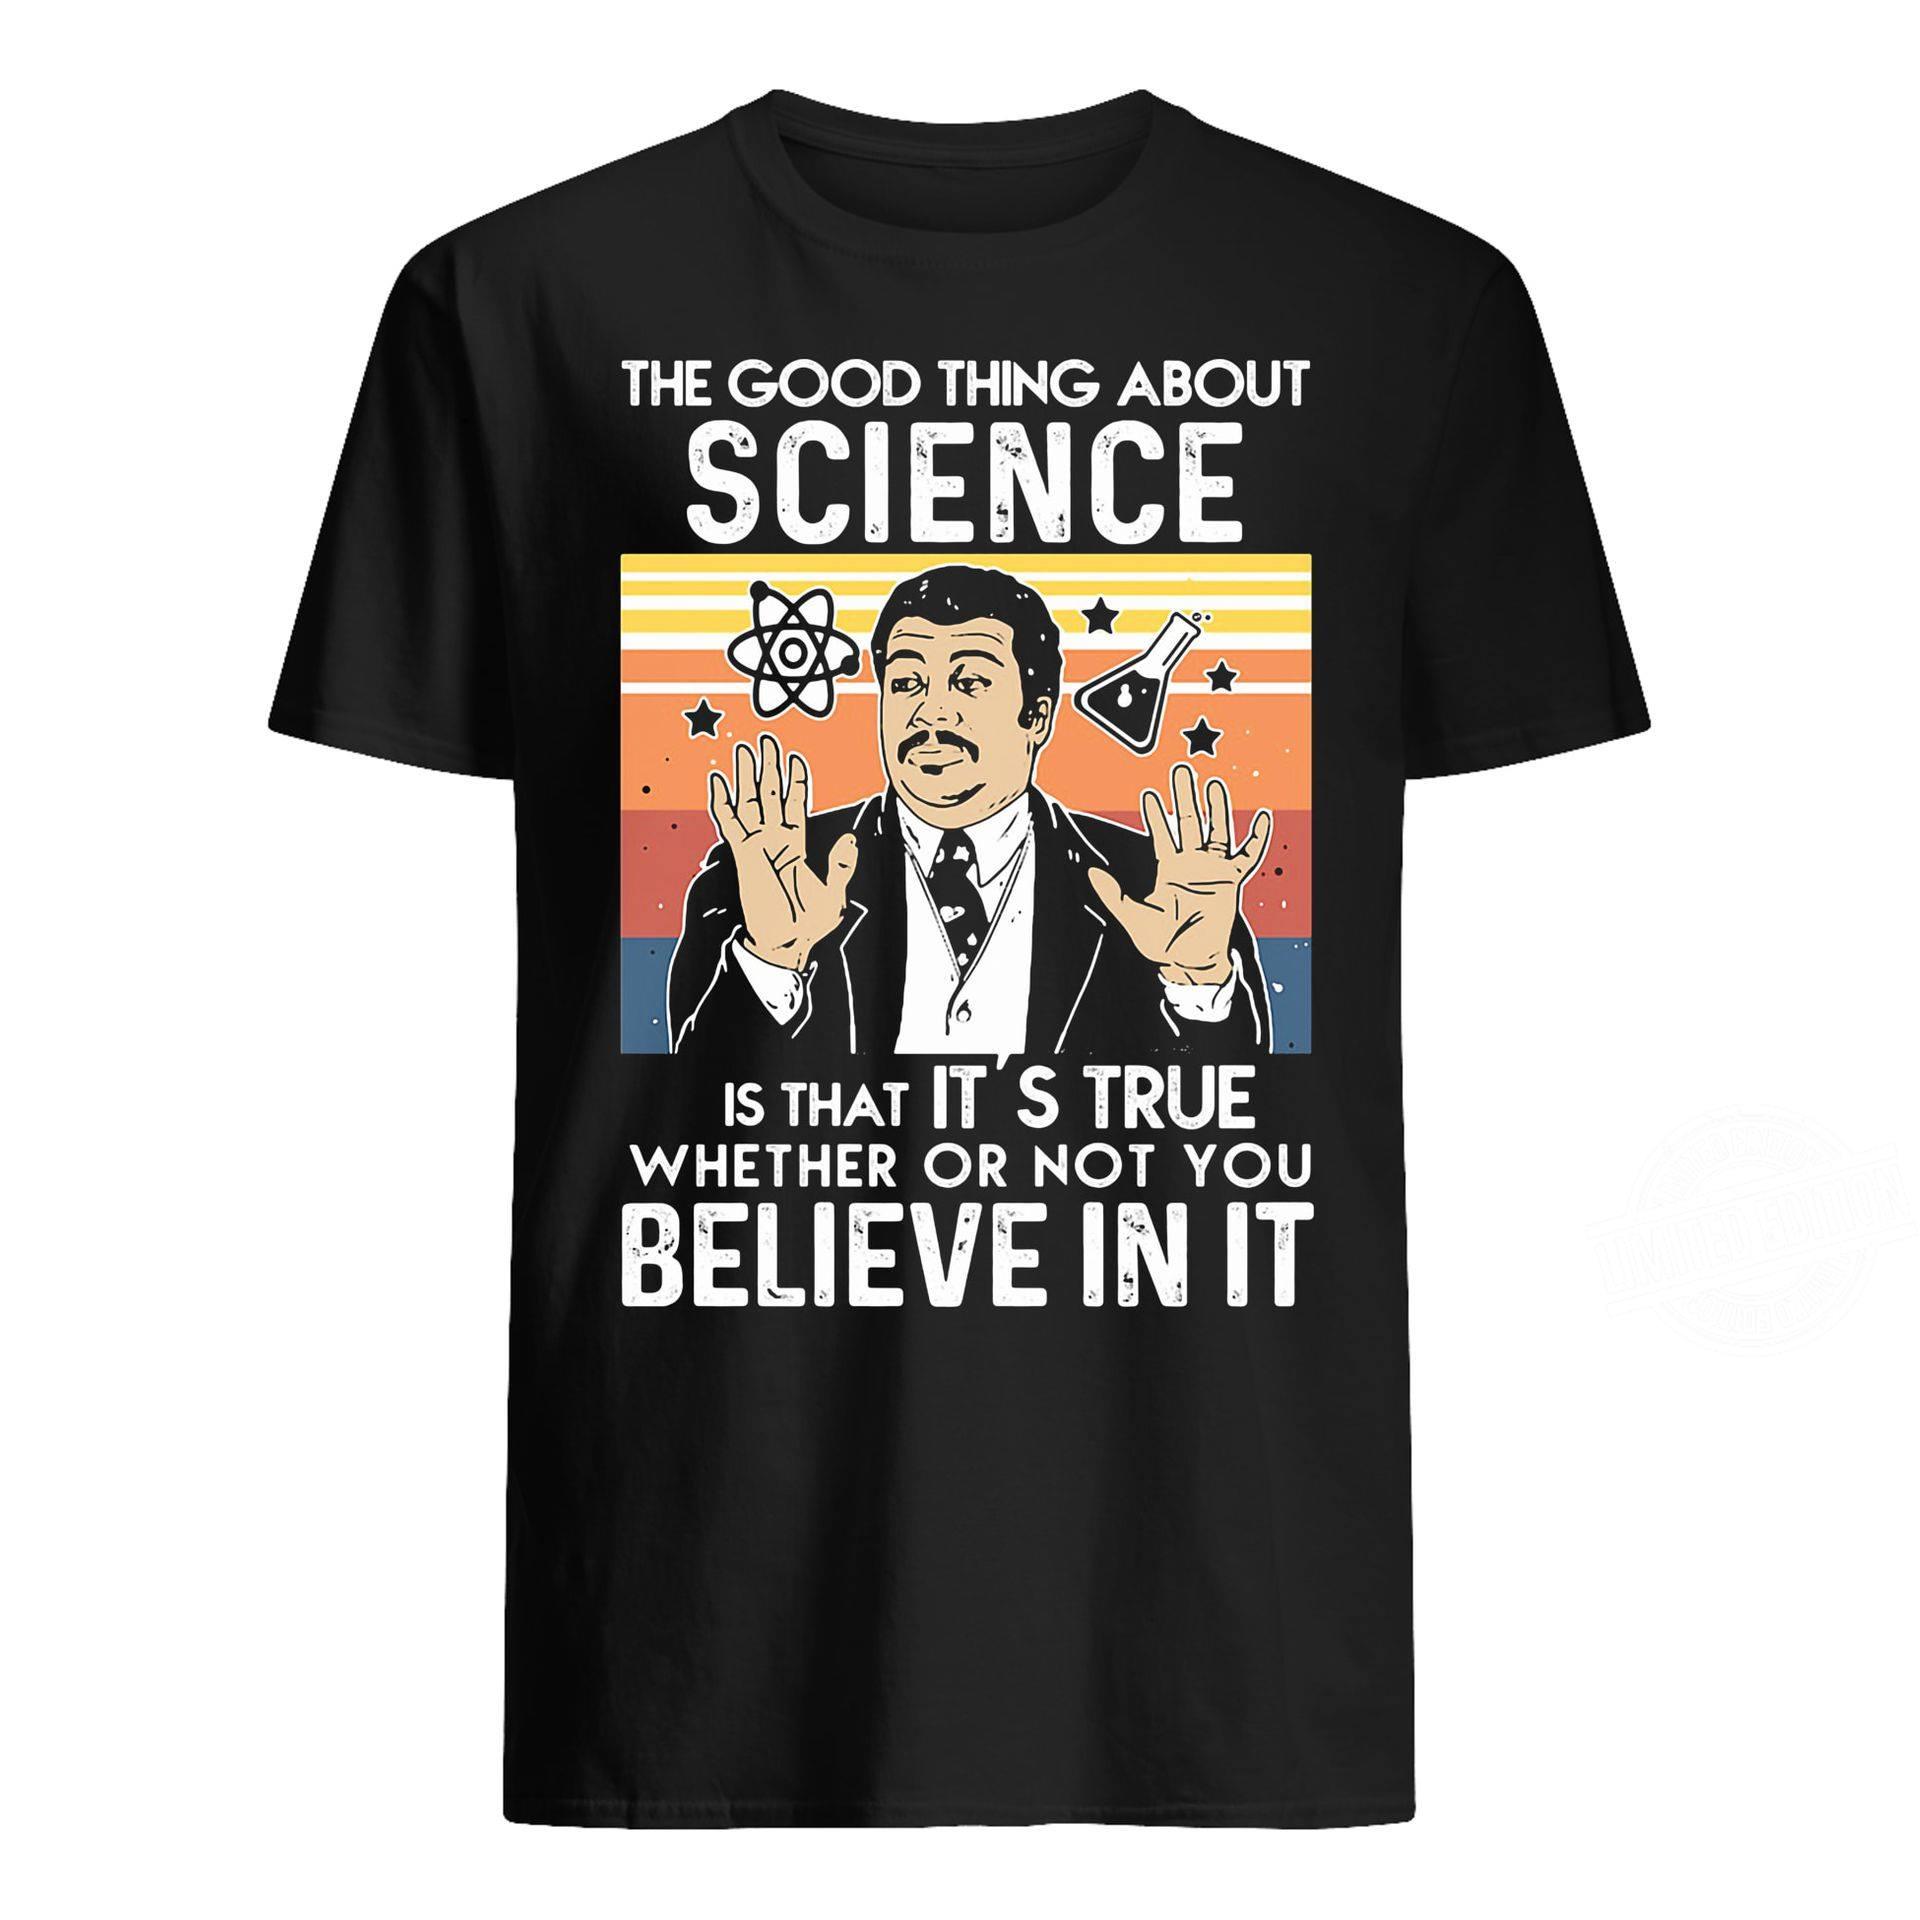 NEIL DEGRASSE TYSON THE GOOD THING ABOUT SCIENCE Shirt